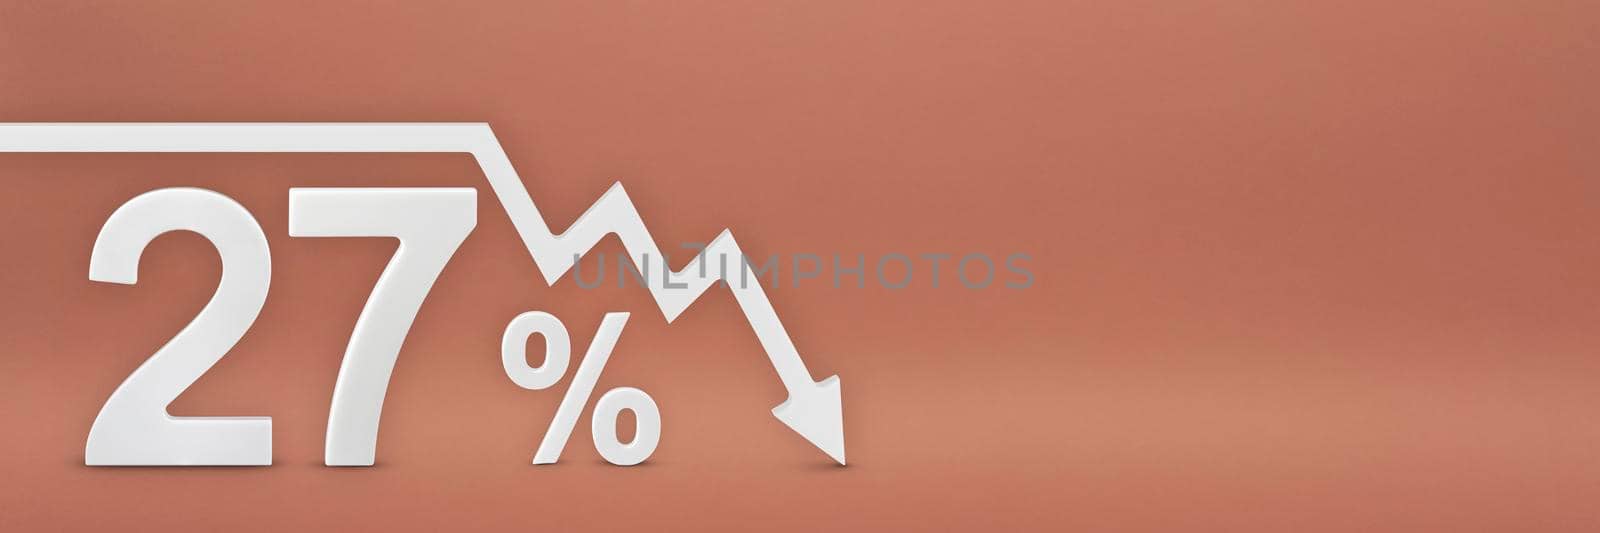 twenty-seven percent, the arrow on the graph is pointing down. Stock market crash, bear market, inflation.Economic collapse, collapse of stocks.3d banner, 27 percent discount sign on a red background. by SERSOL